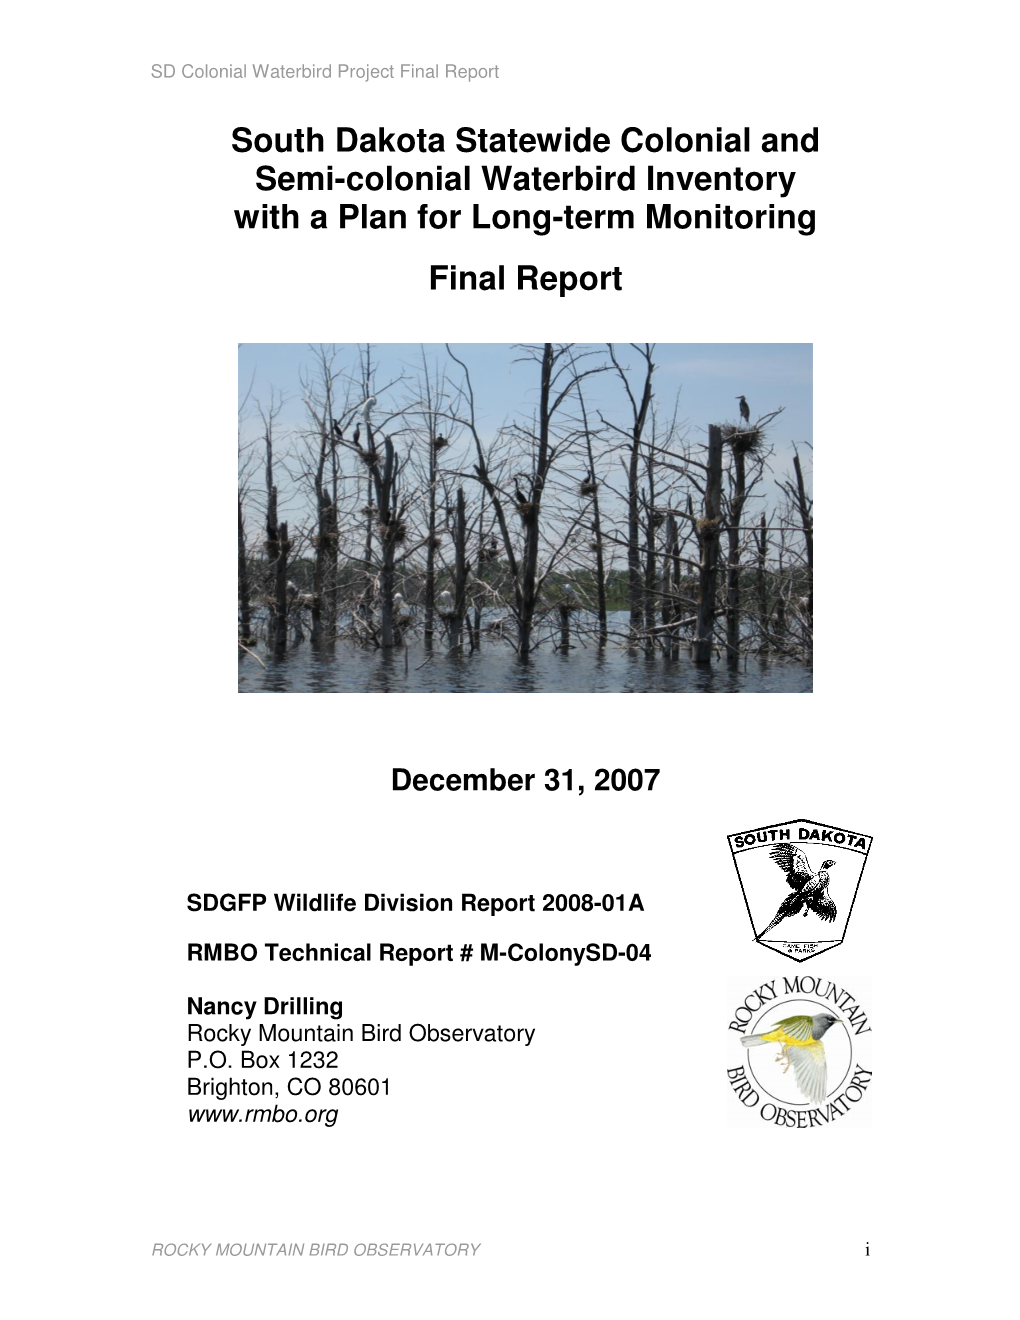 South Dakota Statewide Colonial and Semi-Colonial Waterbird Inventory with a Plan for Long-Term Monitoring